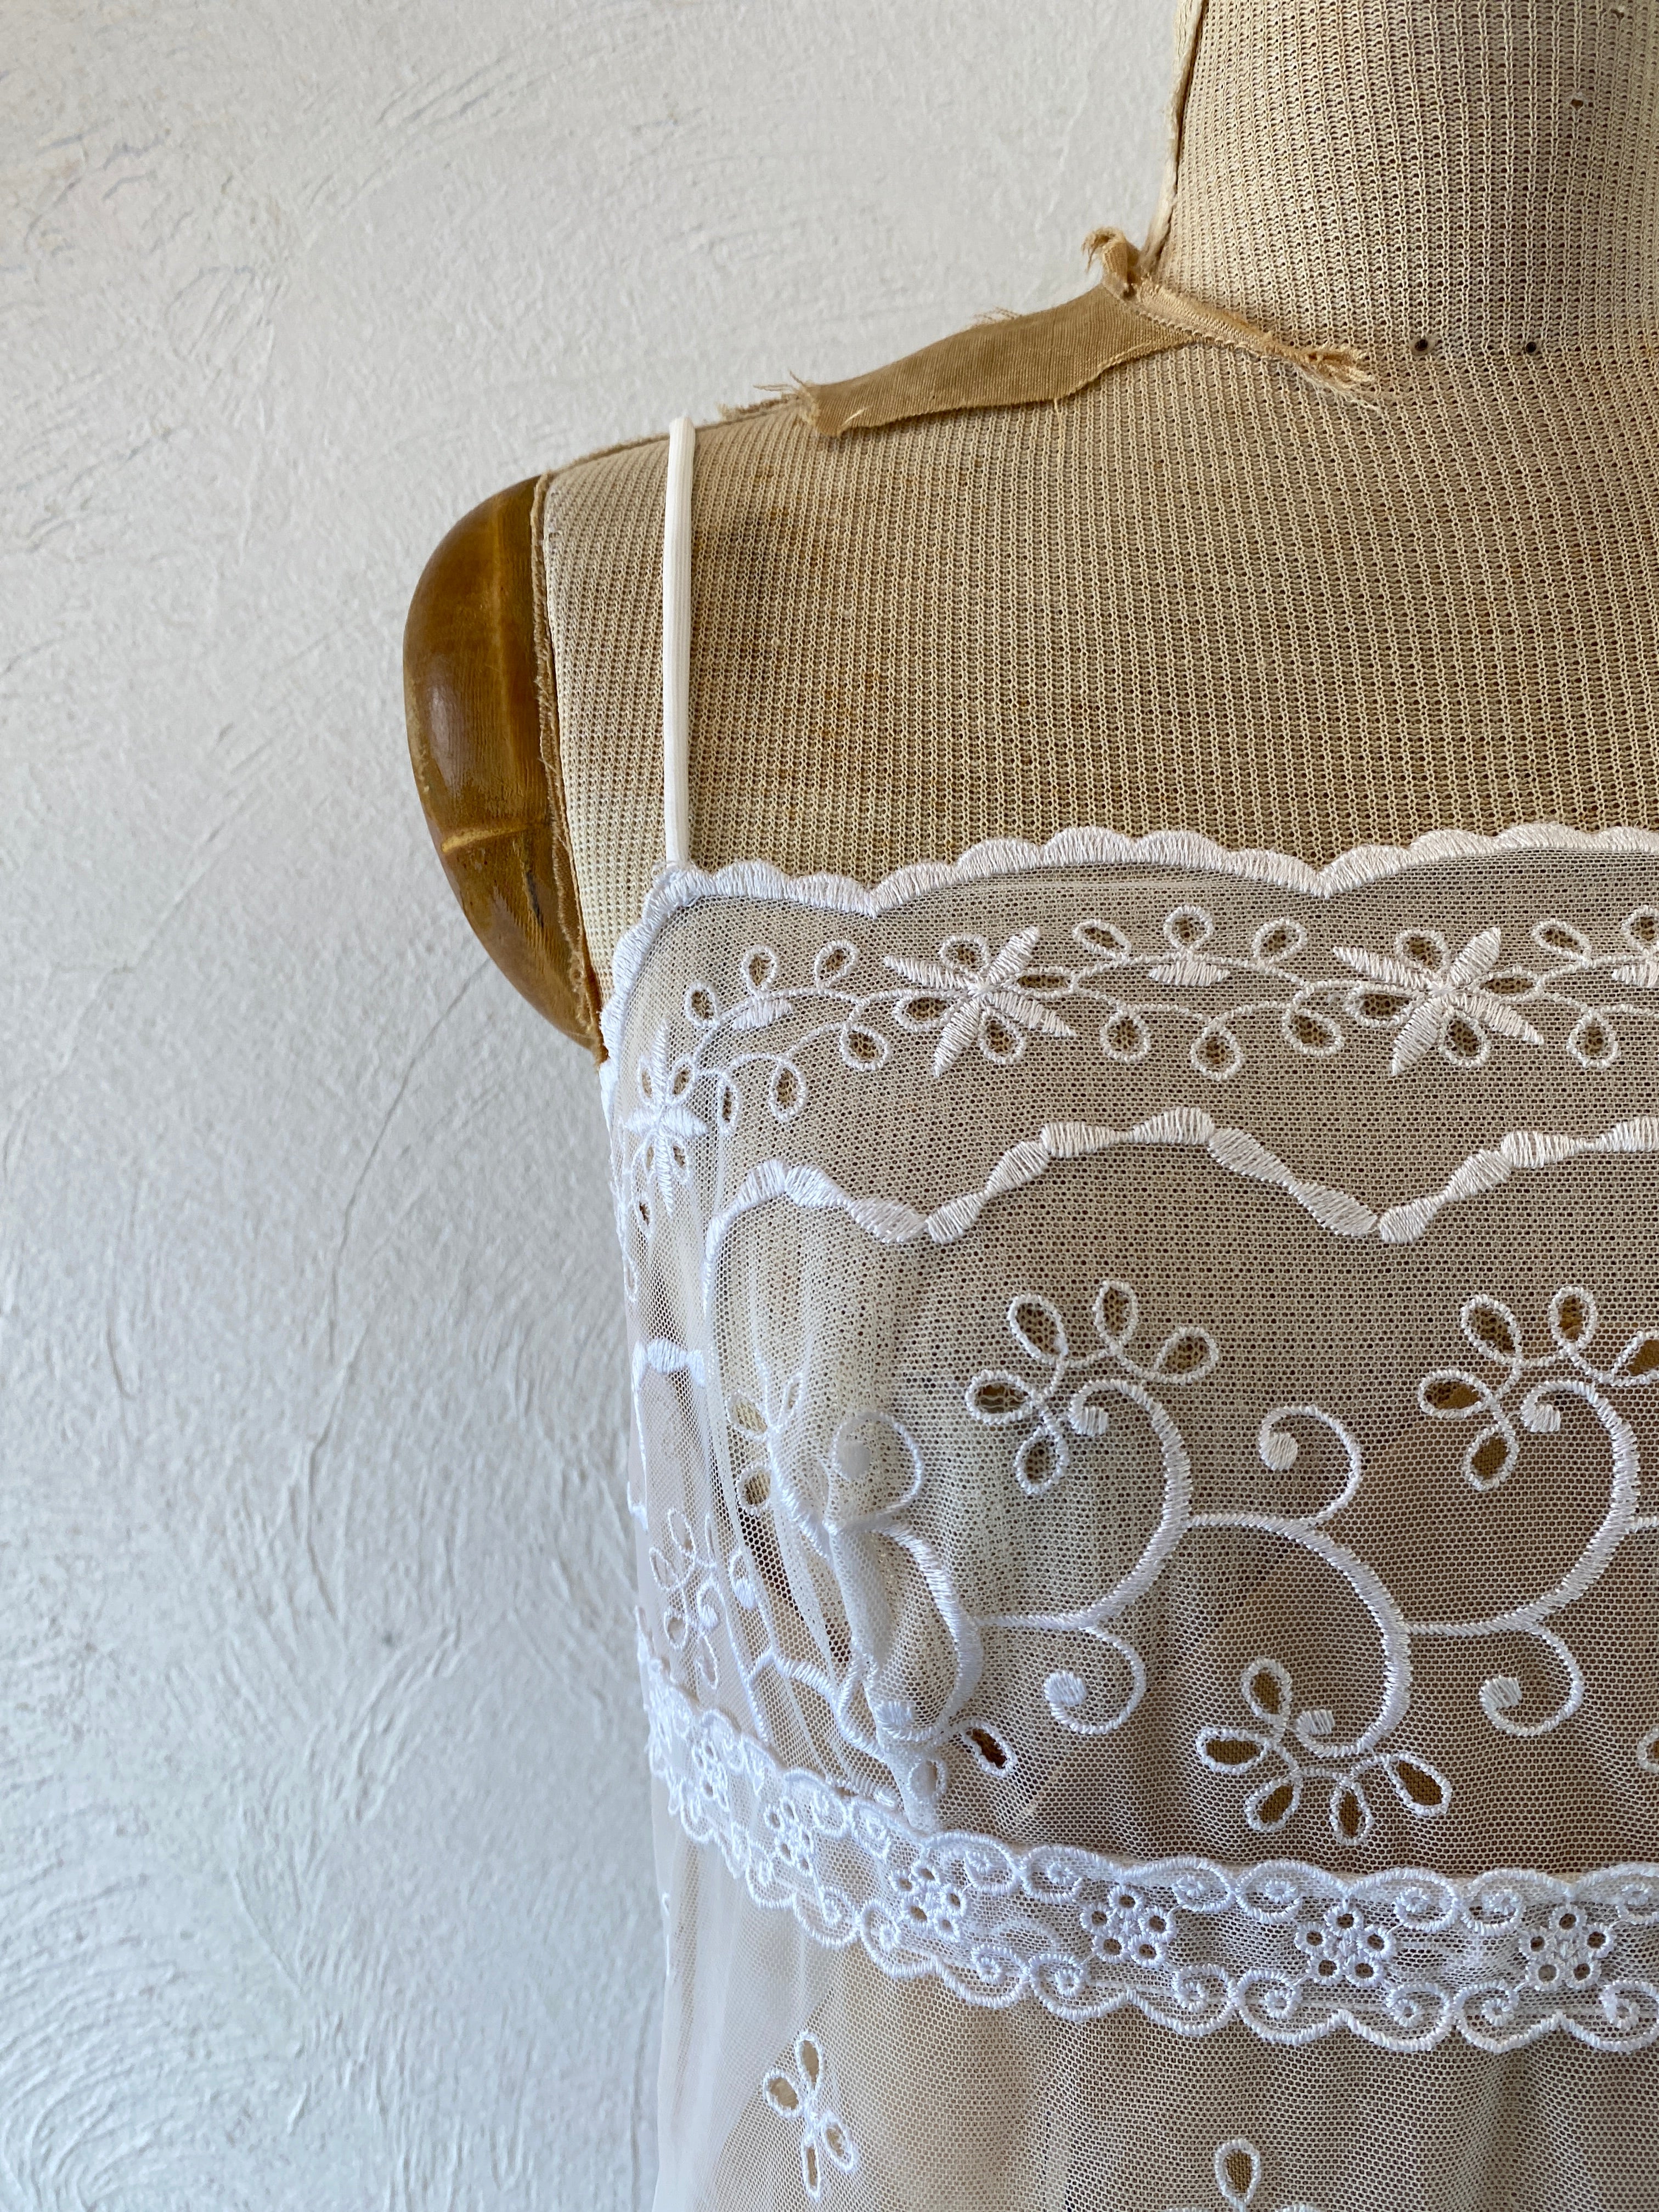 embroidery through camisole